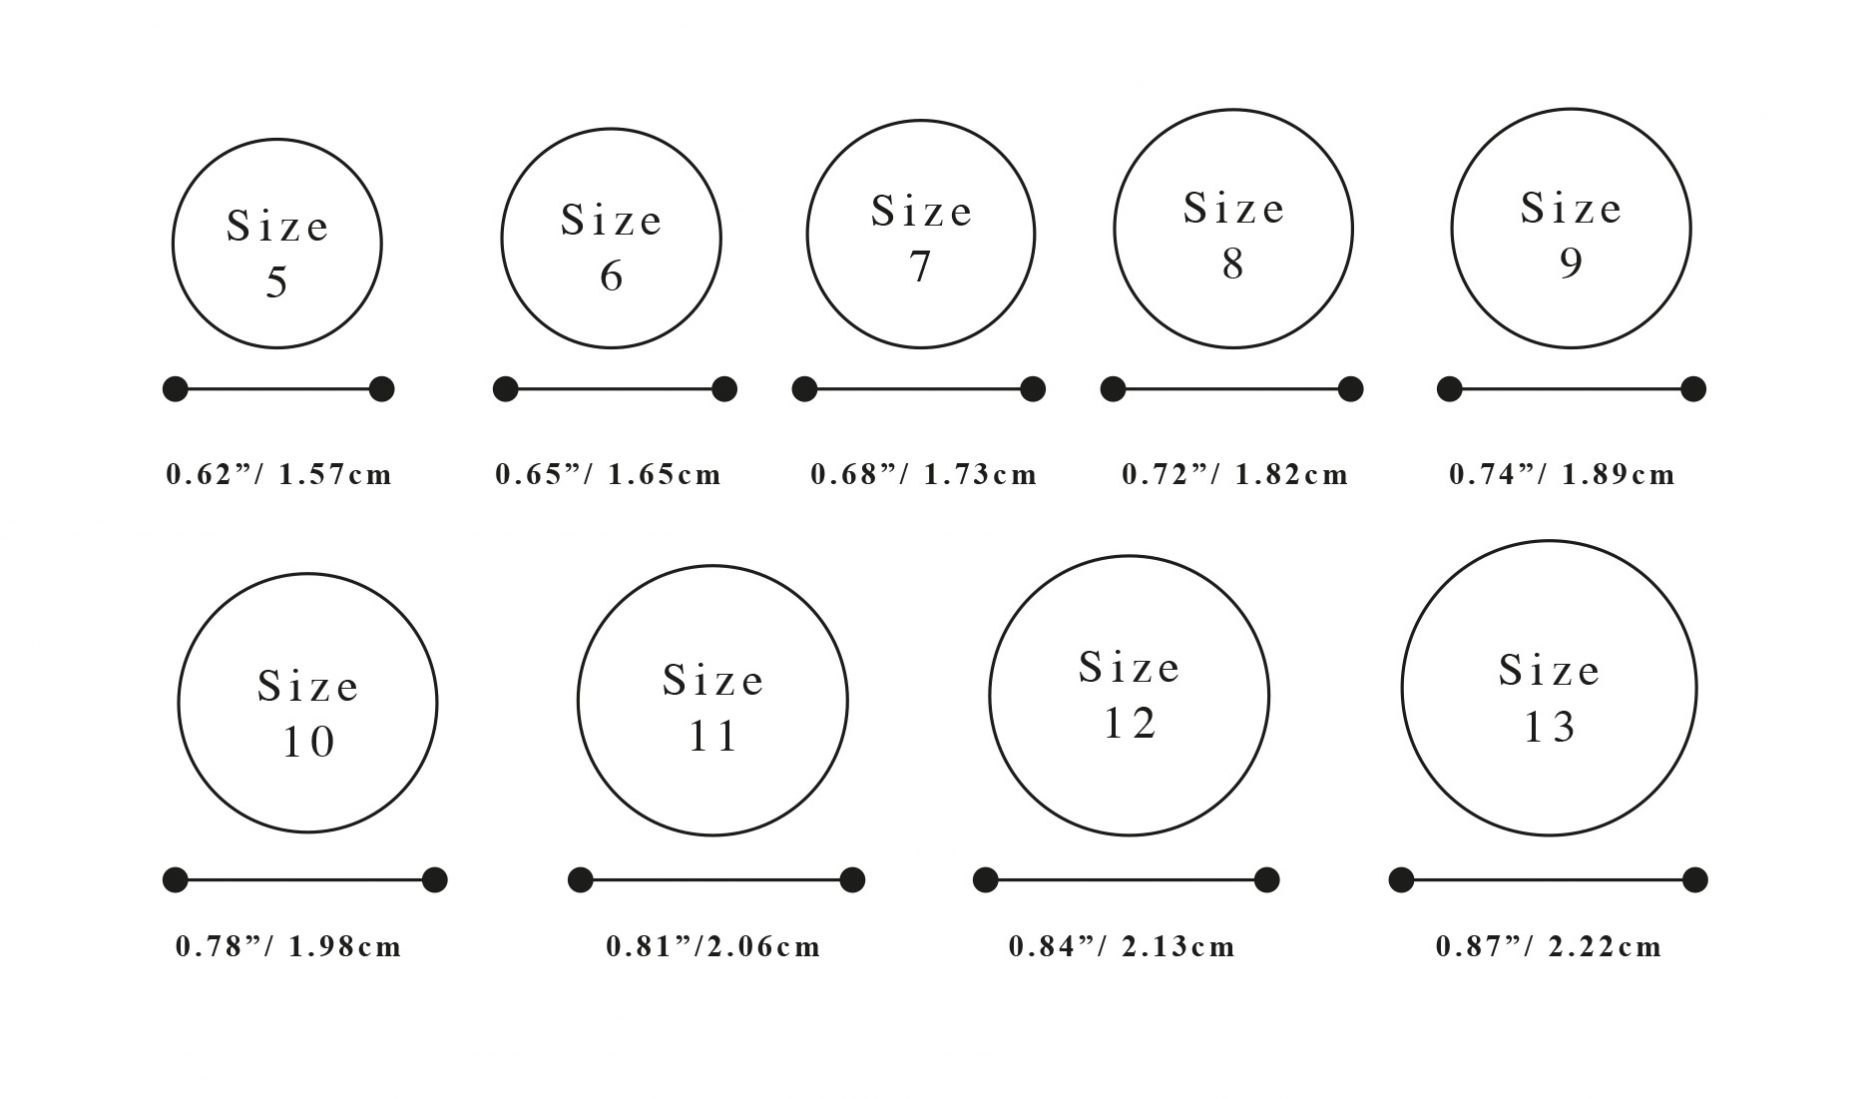 Ring Sizer Chart Printable Securityqust